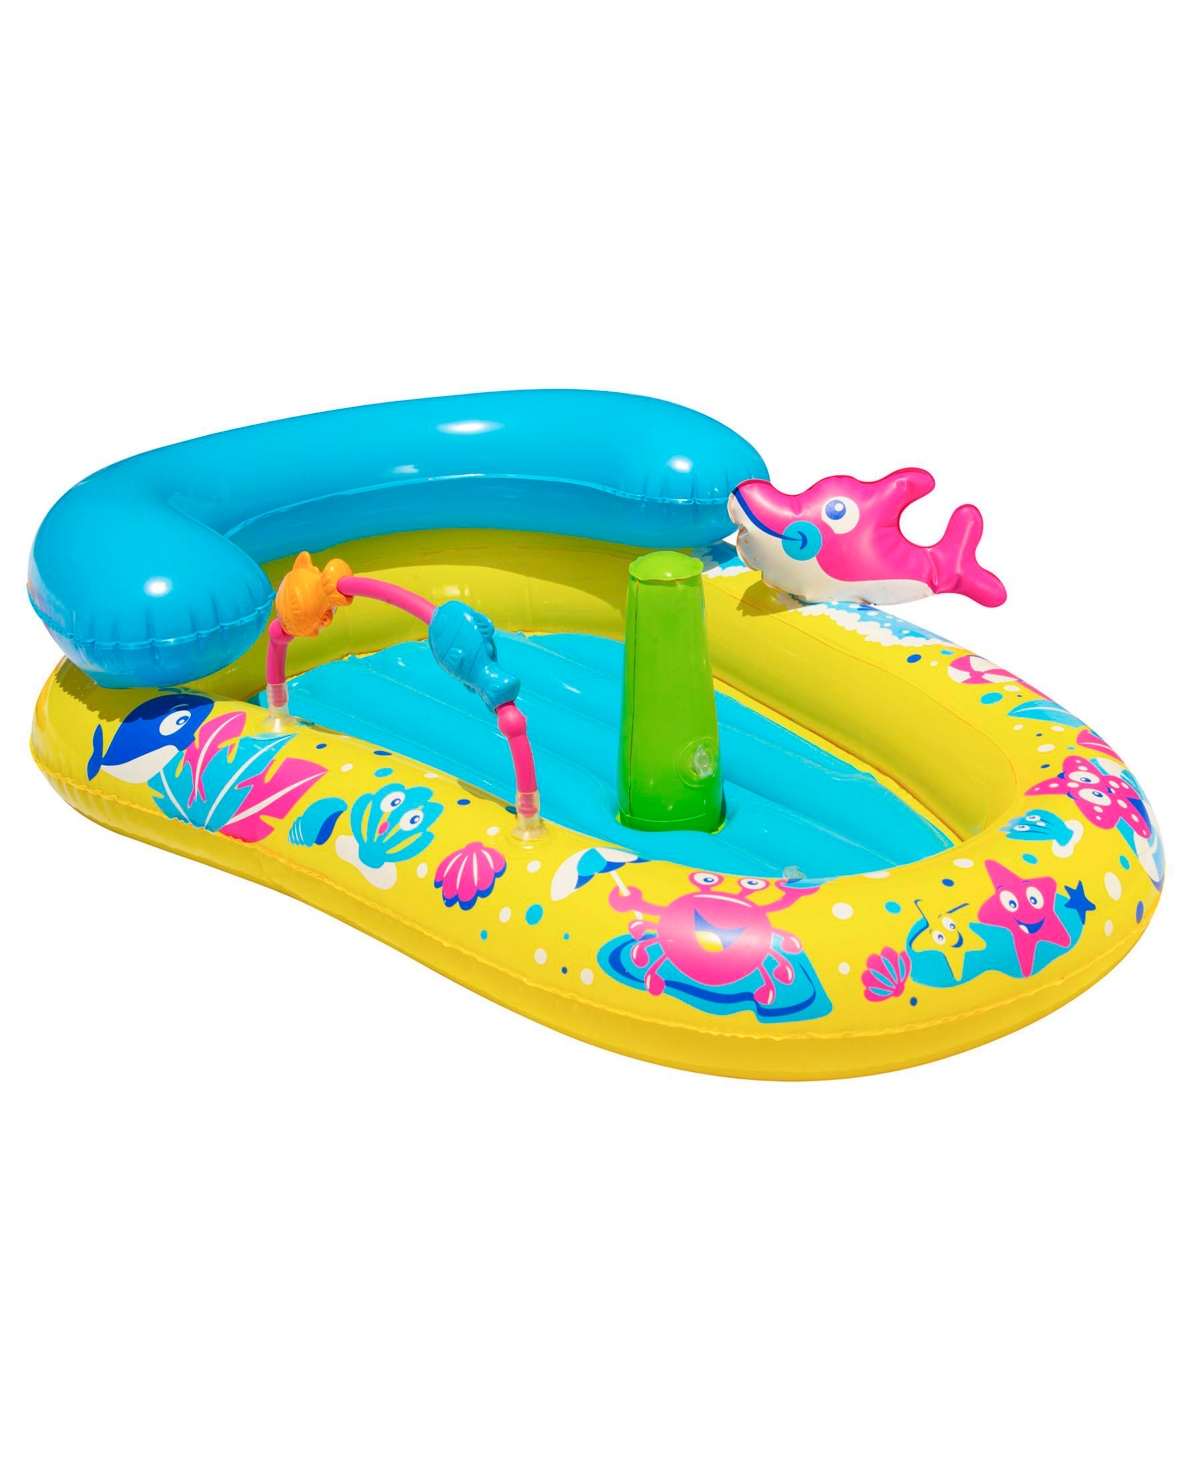 Banzai Jr. Splash Discovery Activity Center Water Play Set In Multi